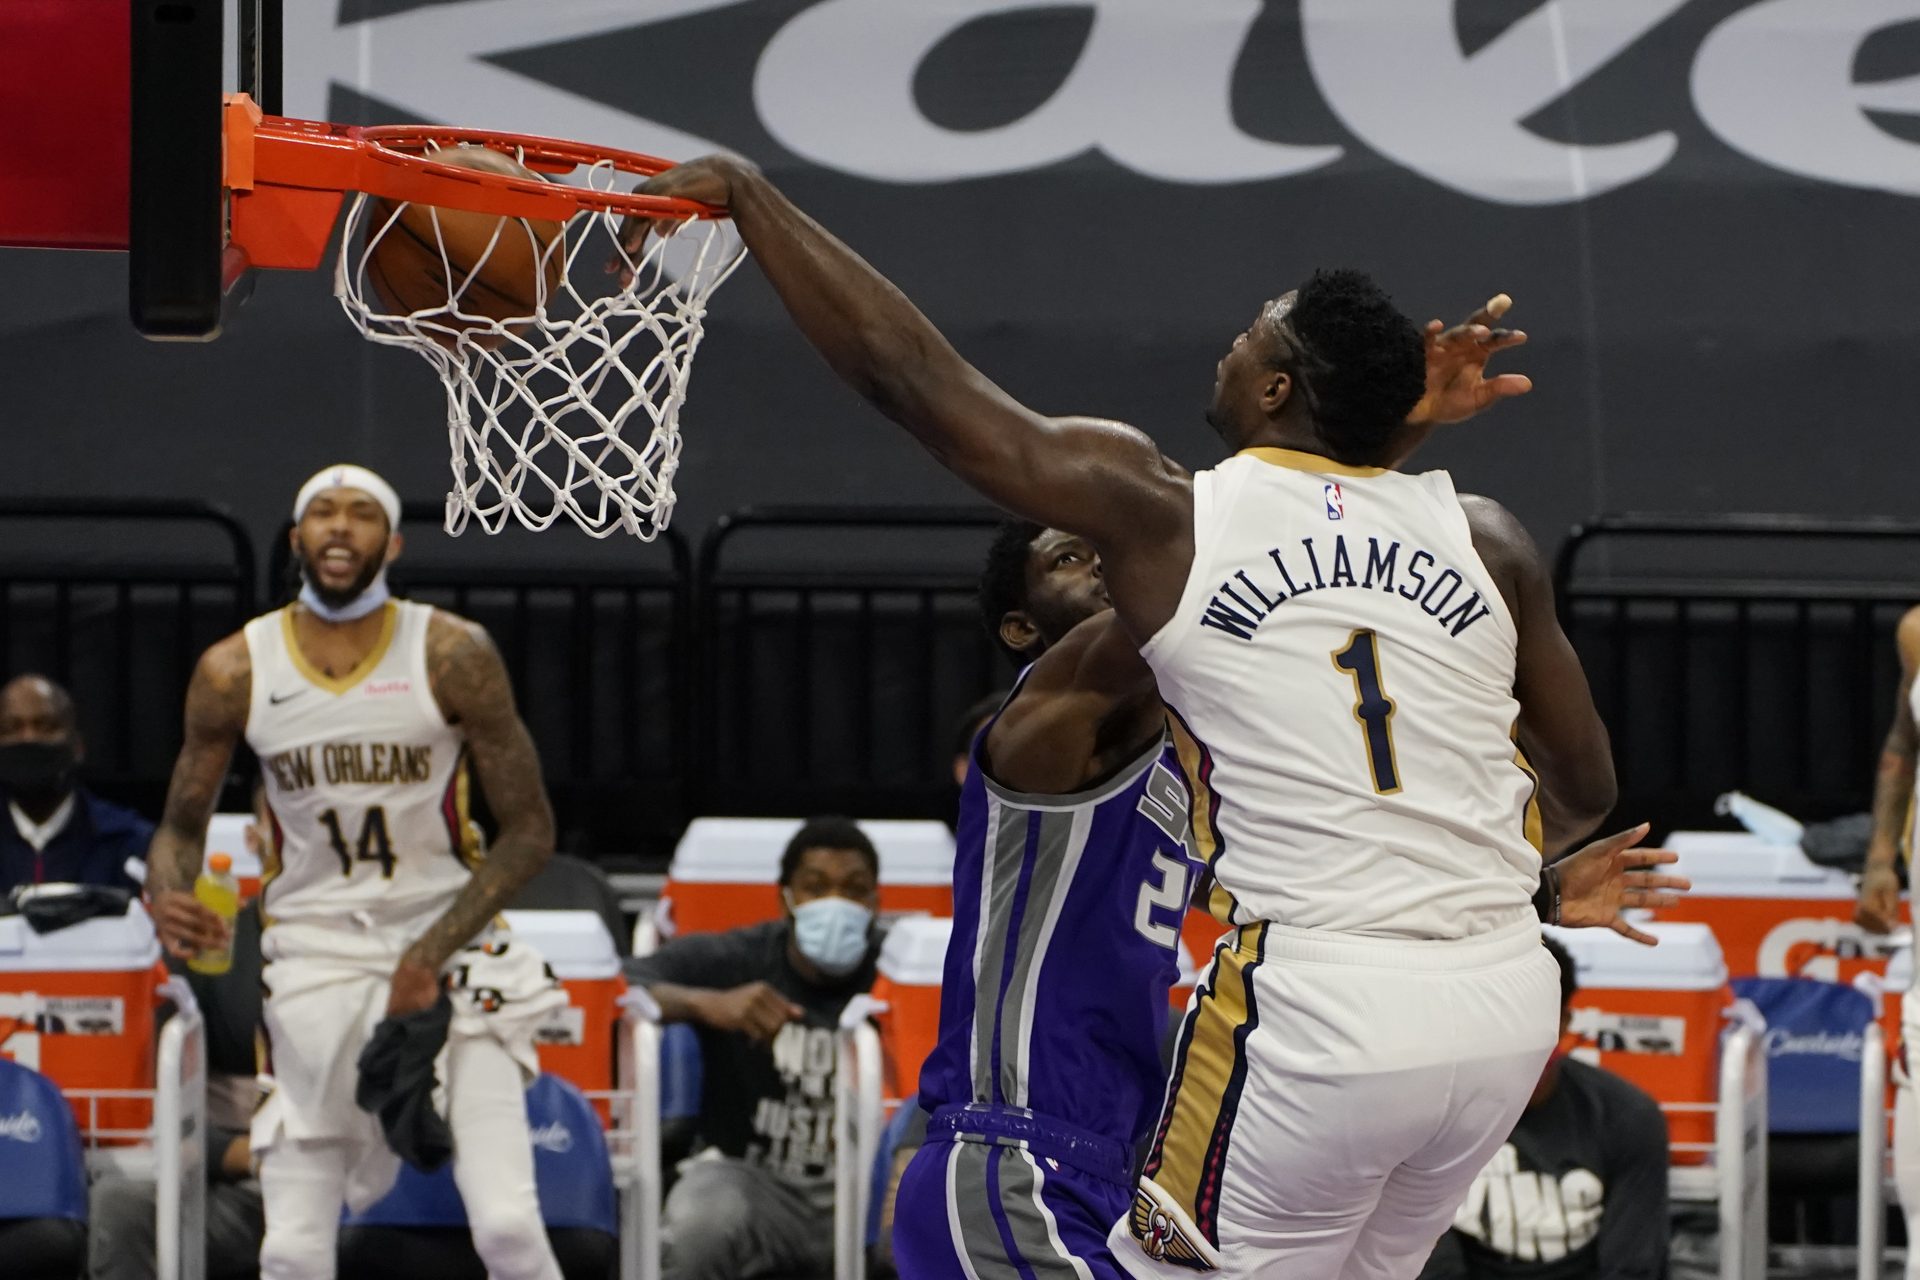 New Orleans Pelicans forward Zion Williamson, right, dunks over Sacramento Kings forward Chimezie Metu during the first quarter of an NBA basketball game in Sacramento, Calif., Sunday, Jan.17, 2021.